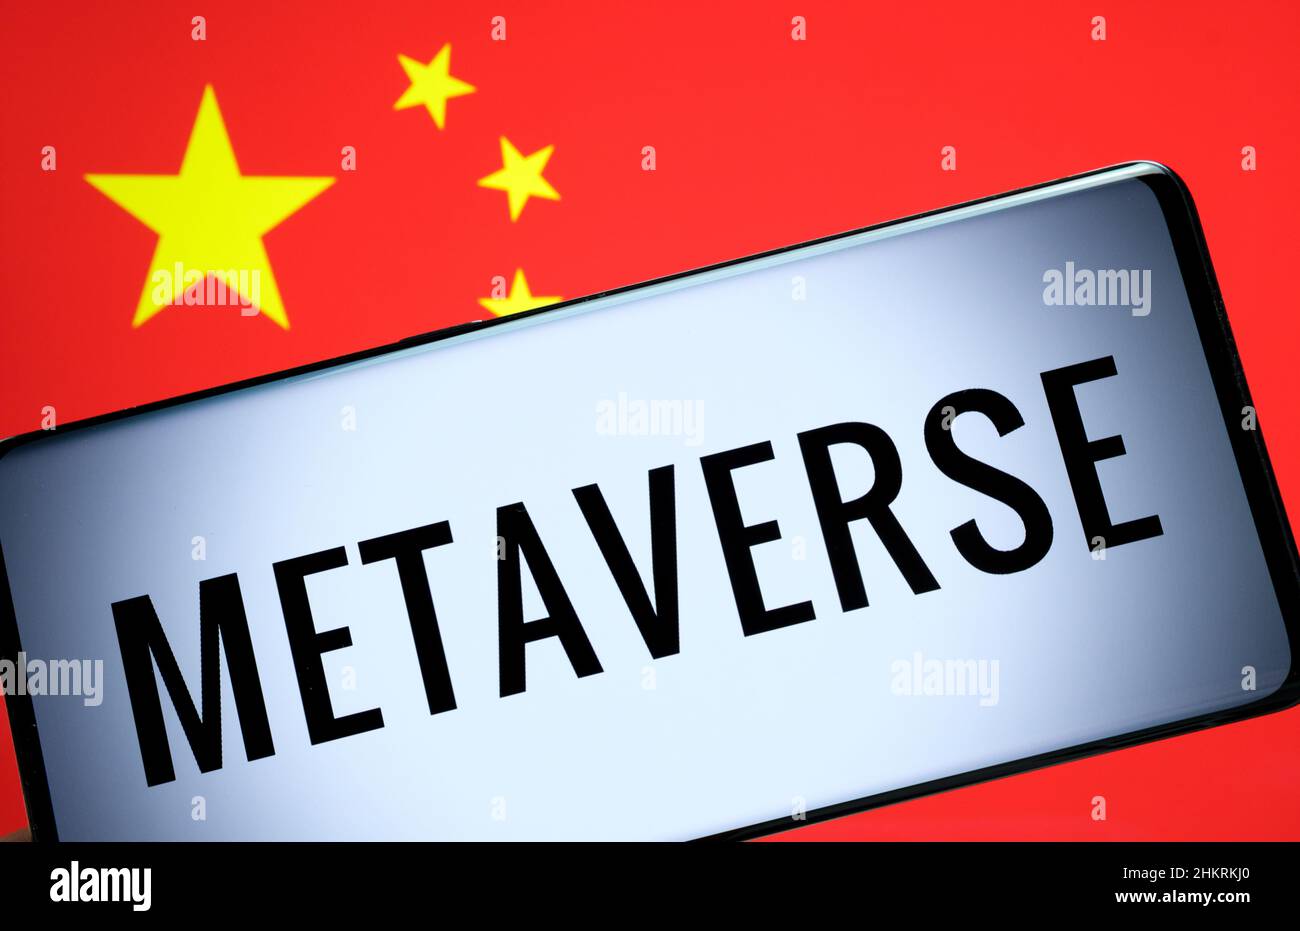 METAVERSE in China concept. Metaverse word seen on smartphone and Chinese flag on the blurred background. Stock Photo